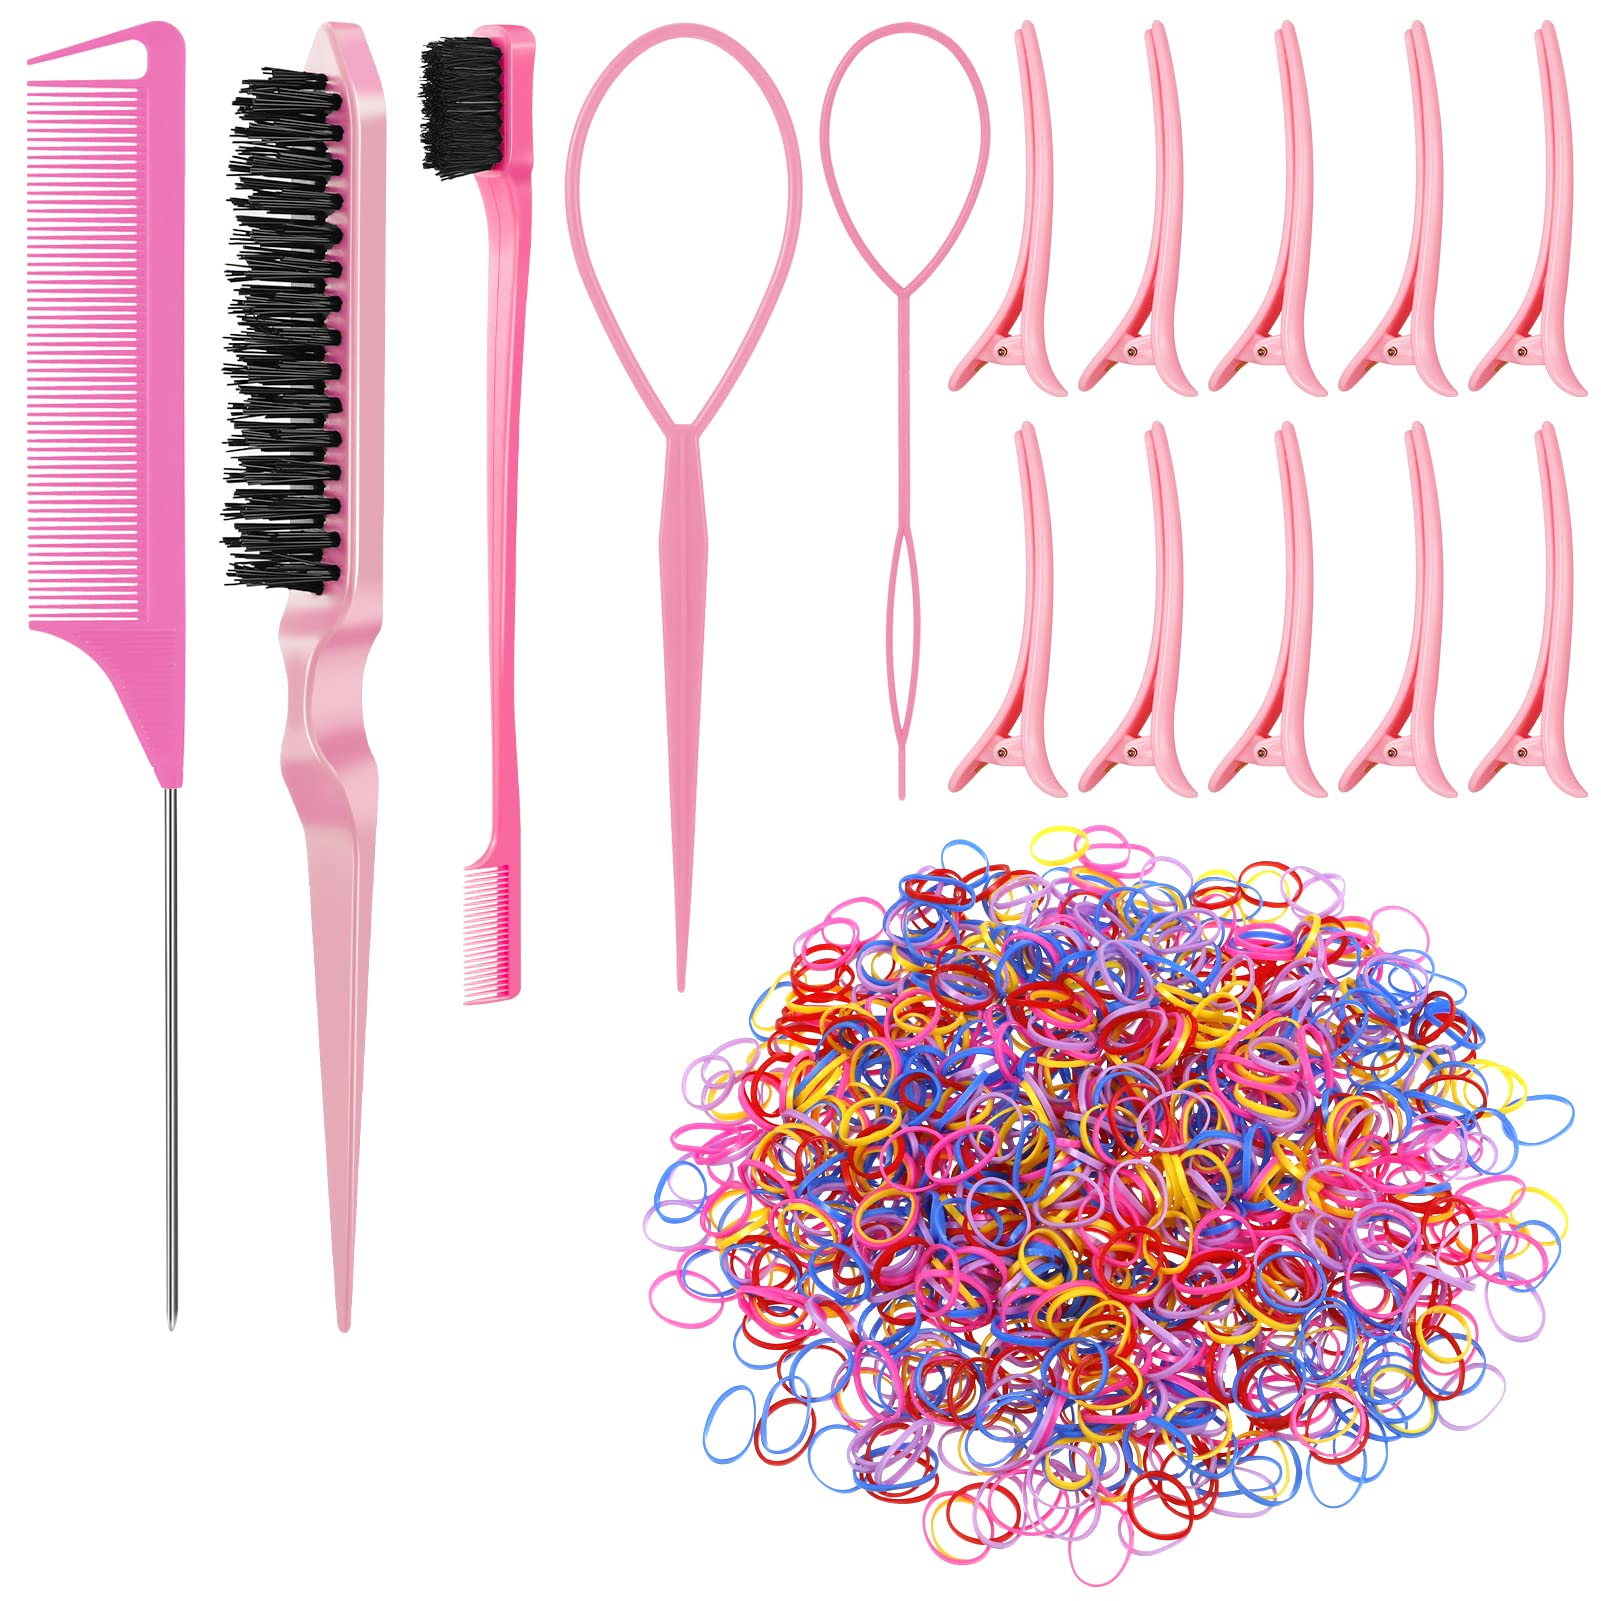  9PCS Topsy Tail Hair Tool & Parting Combs for